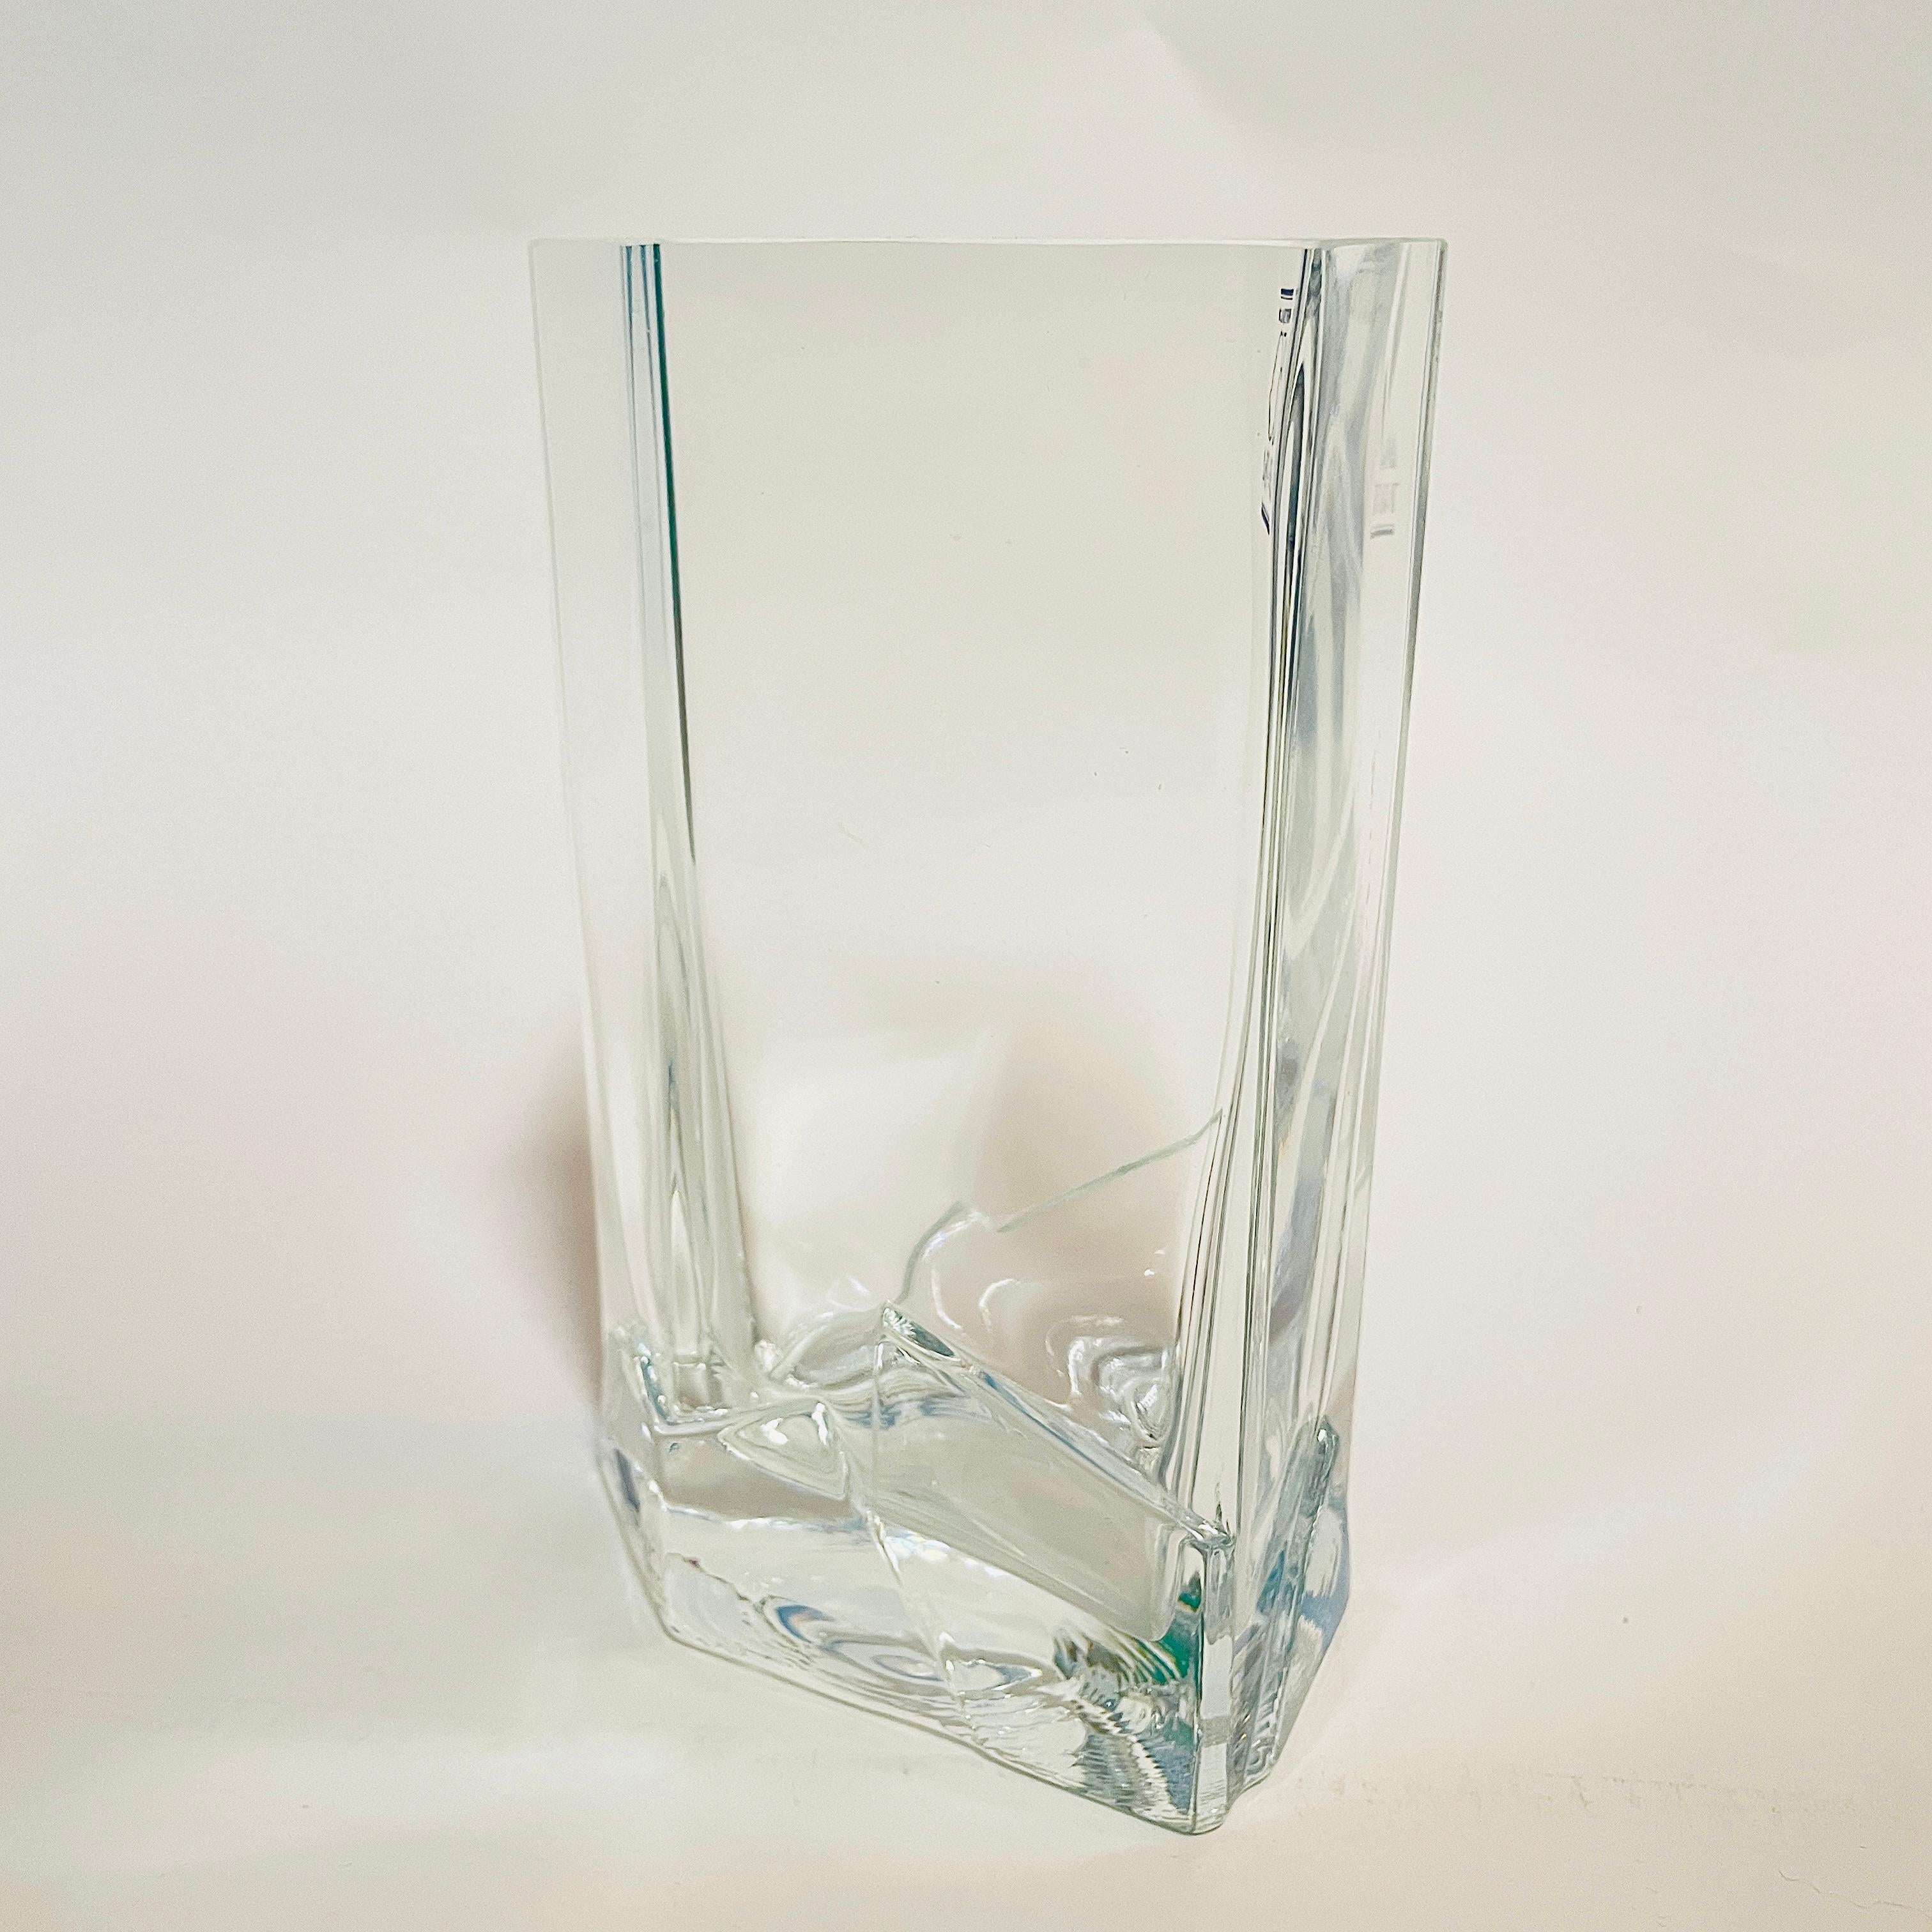 Nuutajärvi Glassworks' vase was designed by Pauli Partanen in 1984. The glass vase was launched in honour of the 150th anniversary of the Finnish company Wärtsilä.

Simply & Stylish vase is made of mould-blown clear glass. 